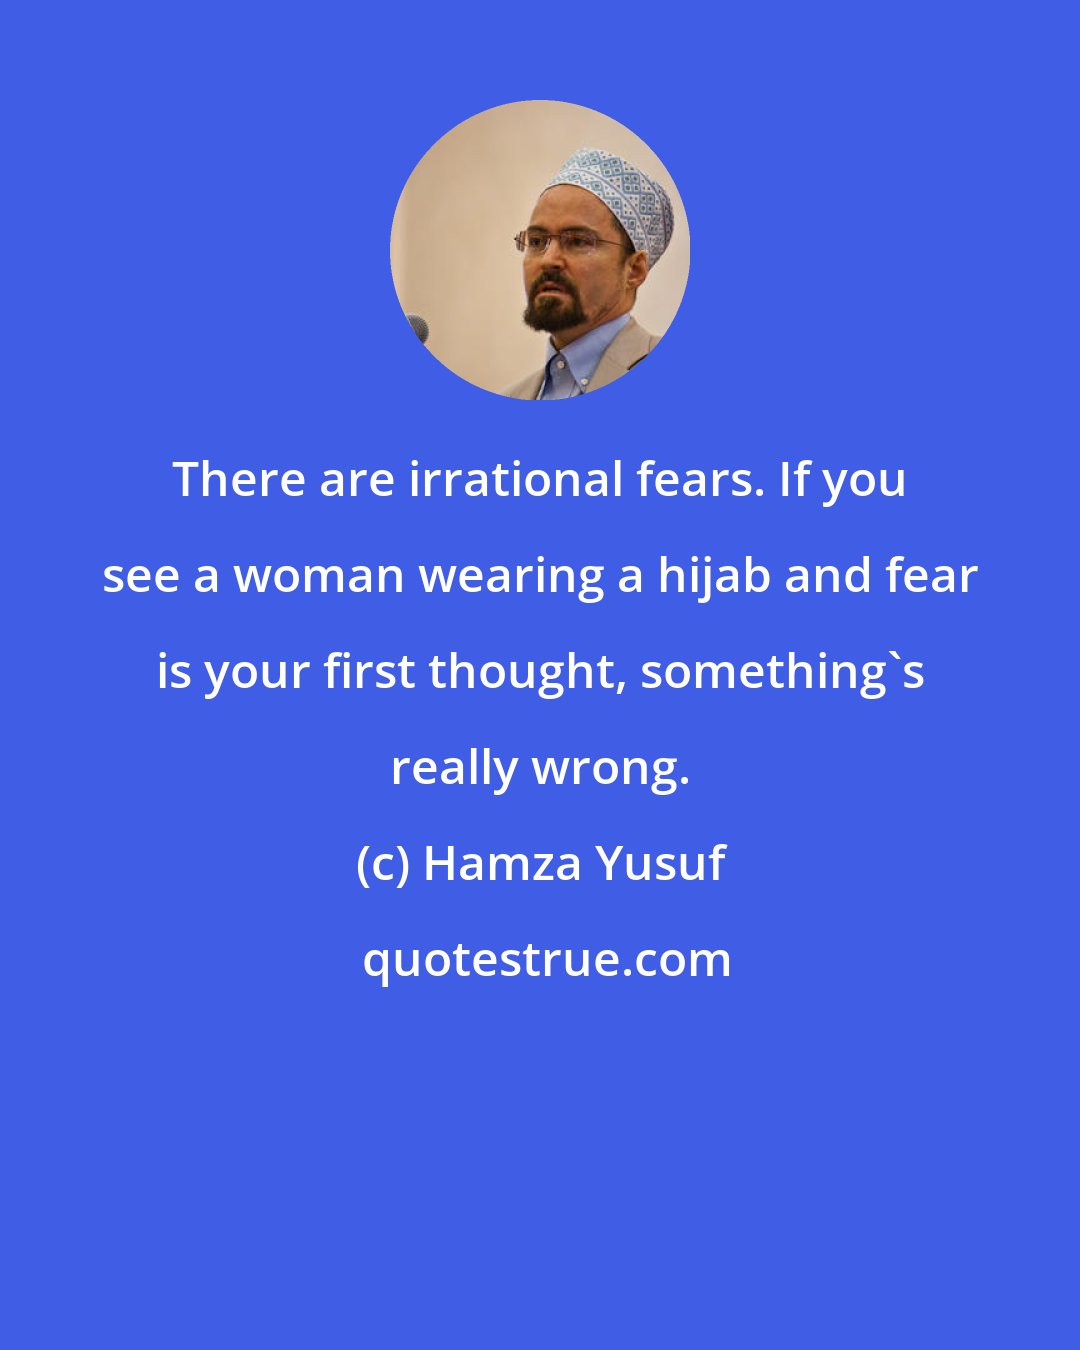 Hamza Yusuf: There are irrational fears. If you see a woman wearing a hijab and fear is your first thought, something's really wrong.